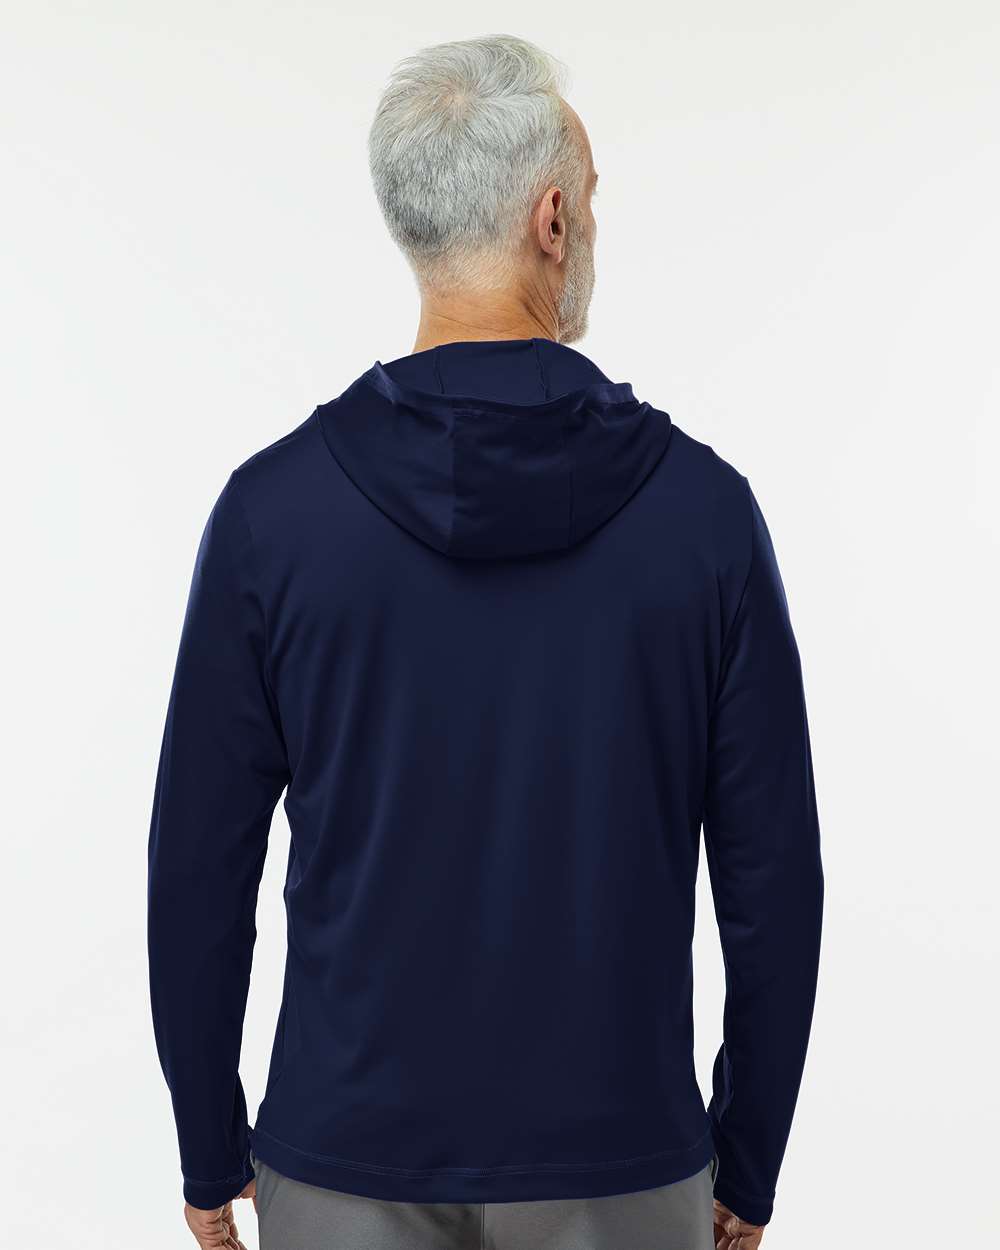 Adidas A596 Lightweight Performance Quarter-Zip Hooded Pullover #colormdl_Collegiate Navy